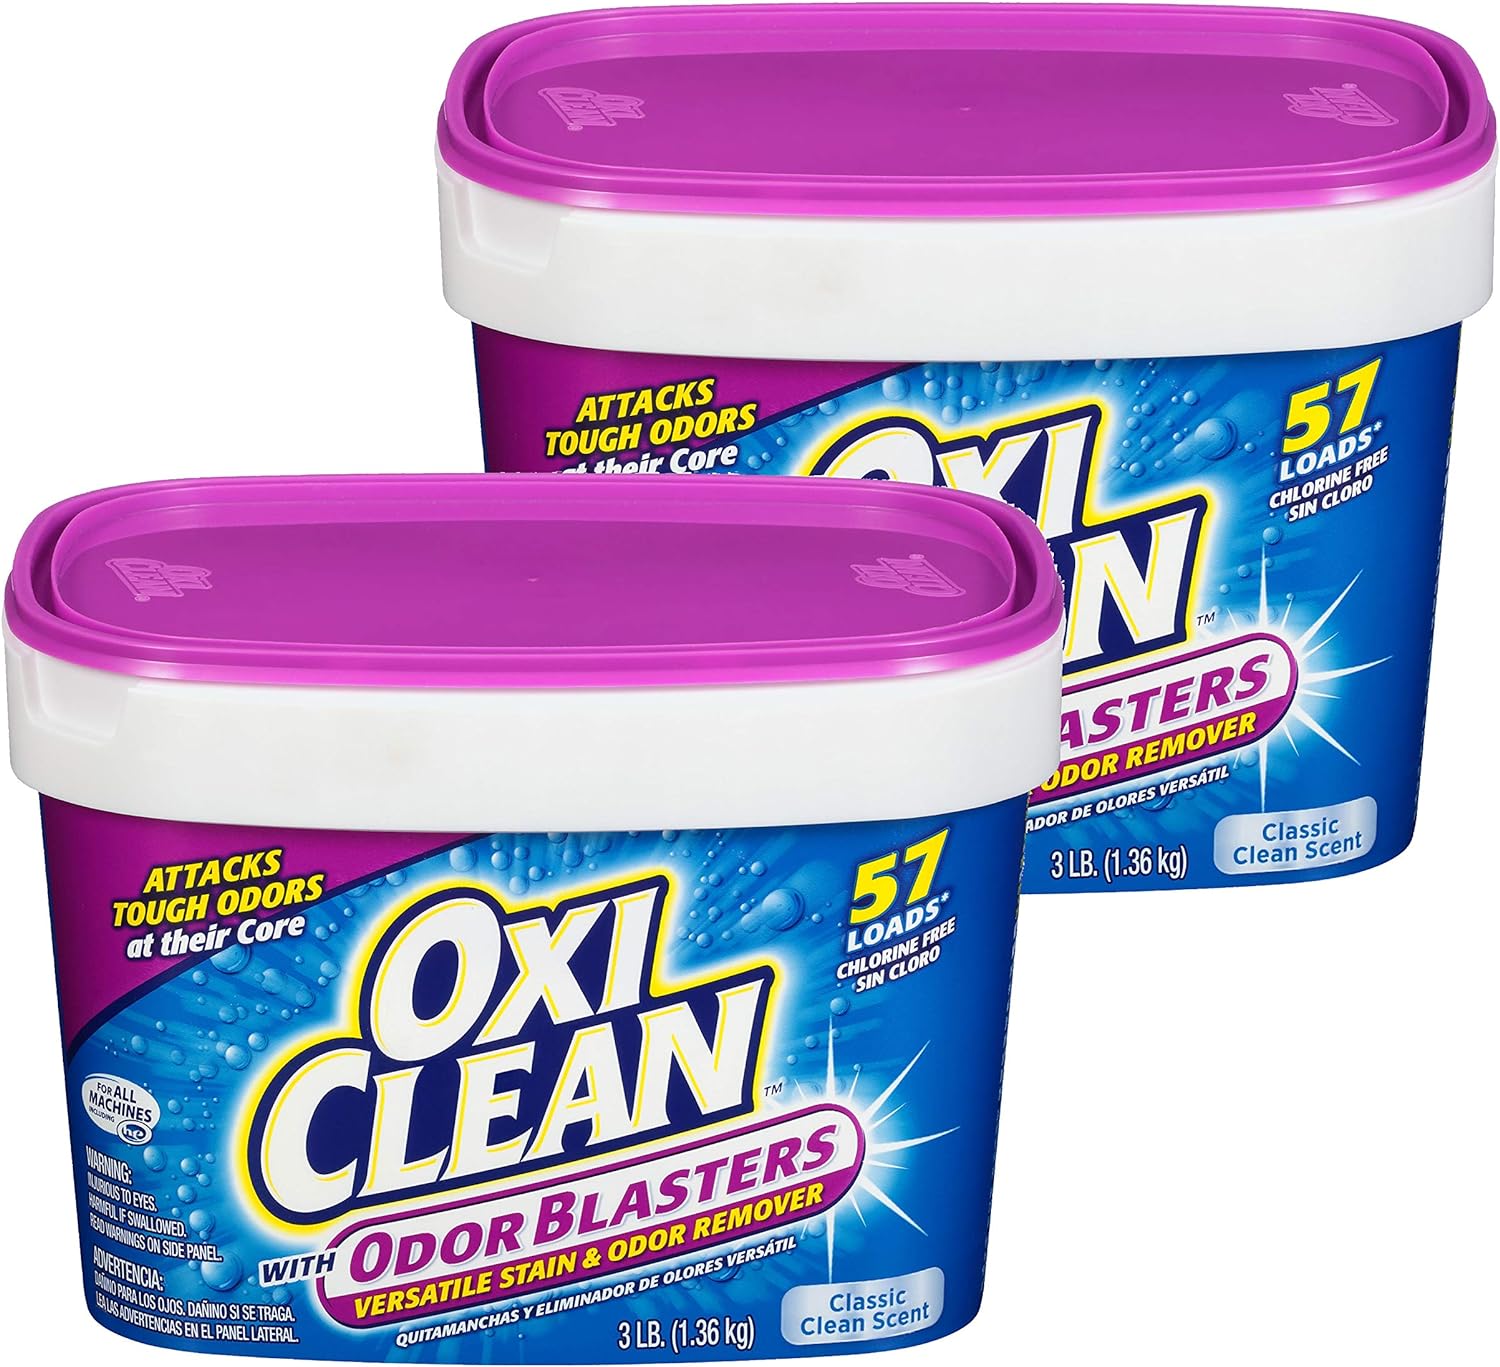 OxiClean with Odor Blasters Versatile Stain & Odor Remover 3 lb Tub - Pack of 2 : Health & Household